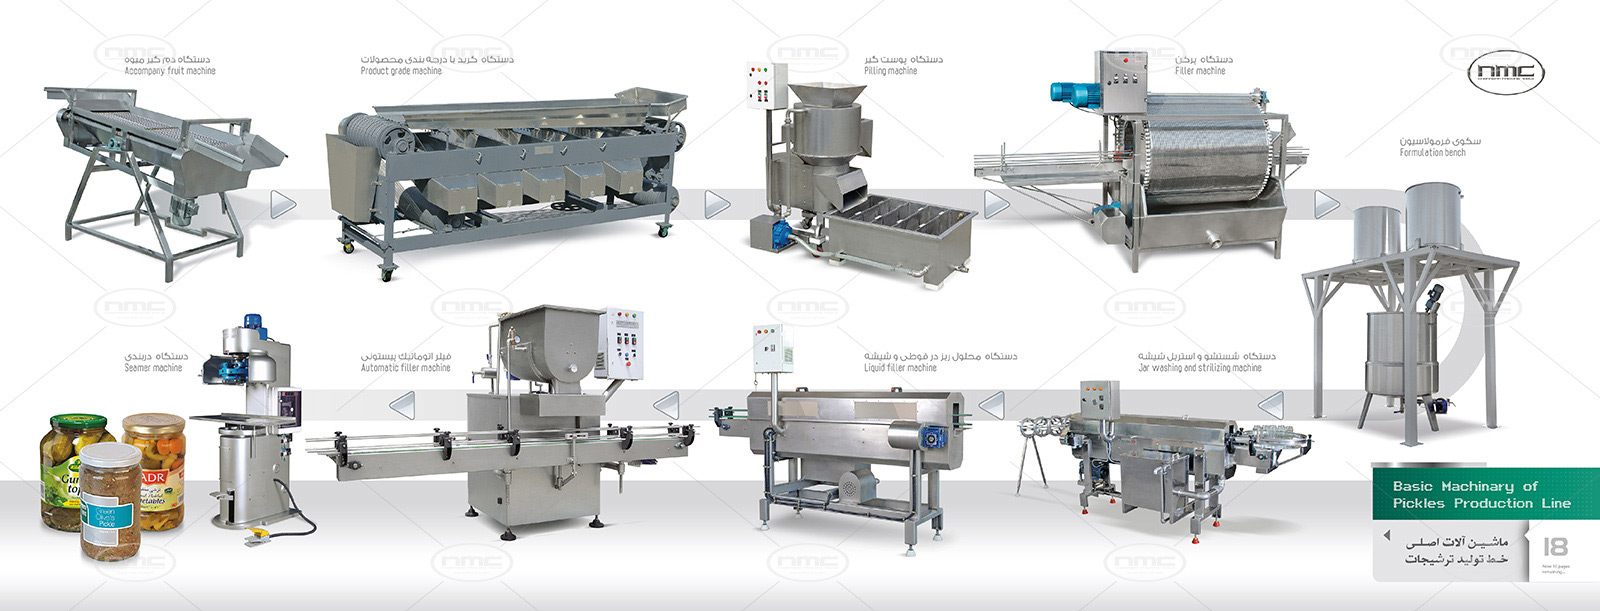 Pickles Production Line Machinery